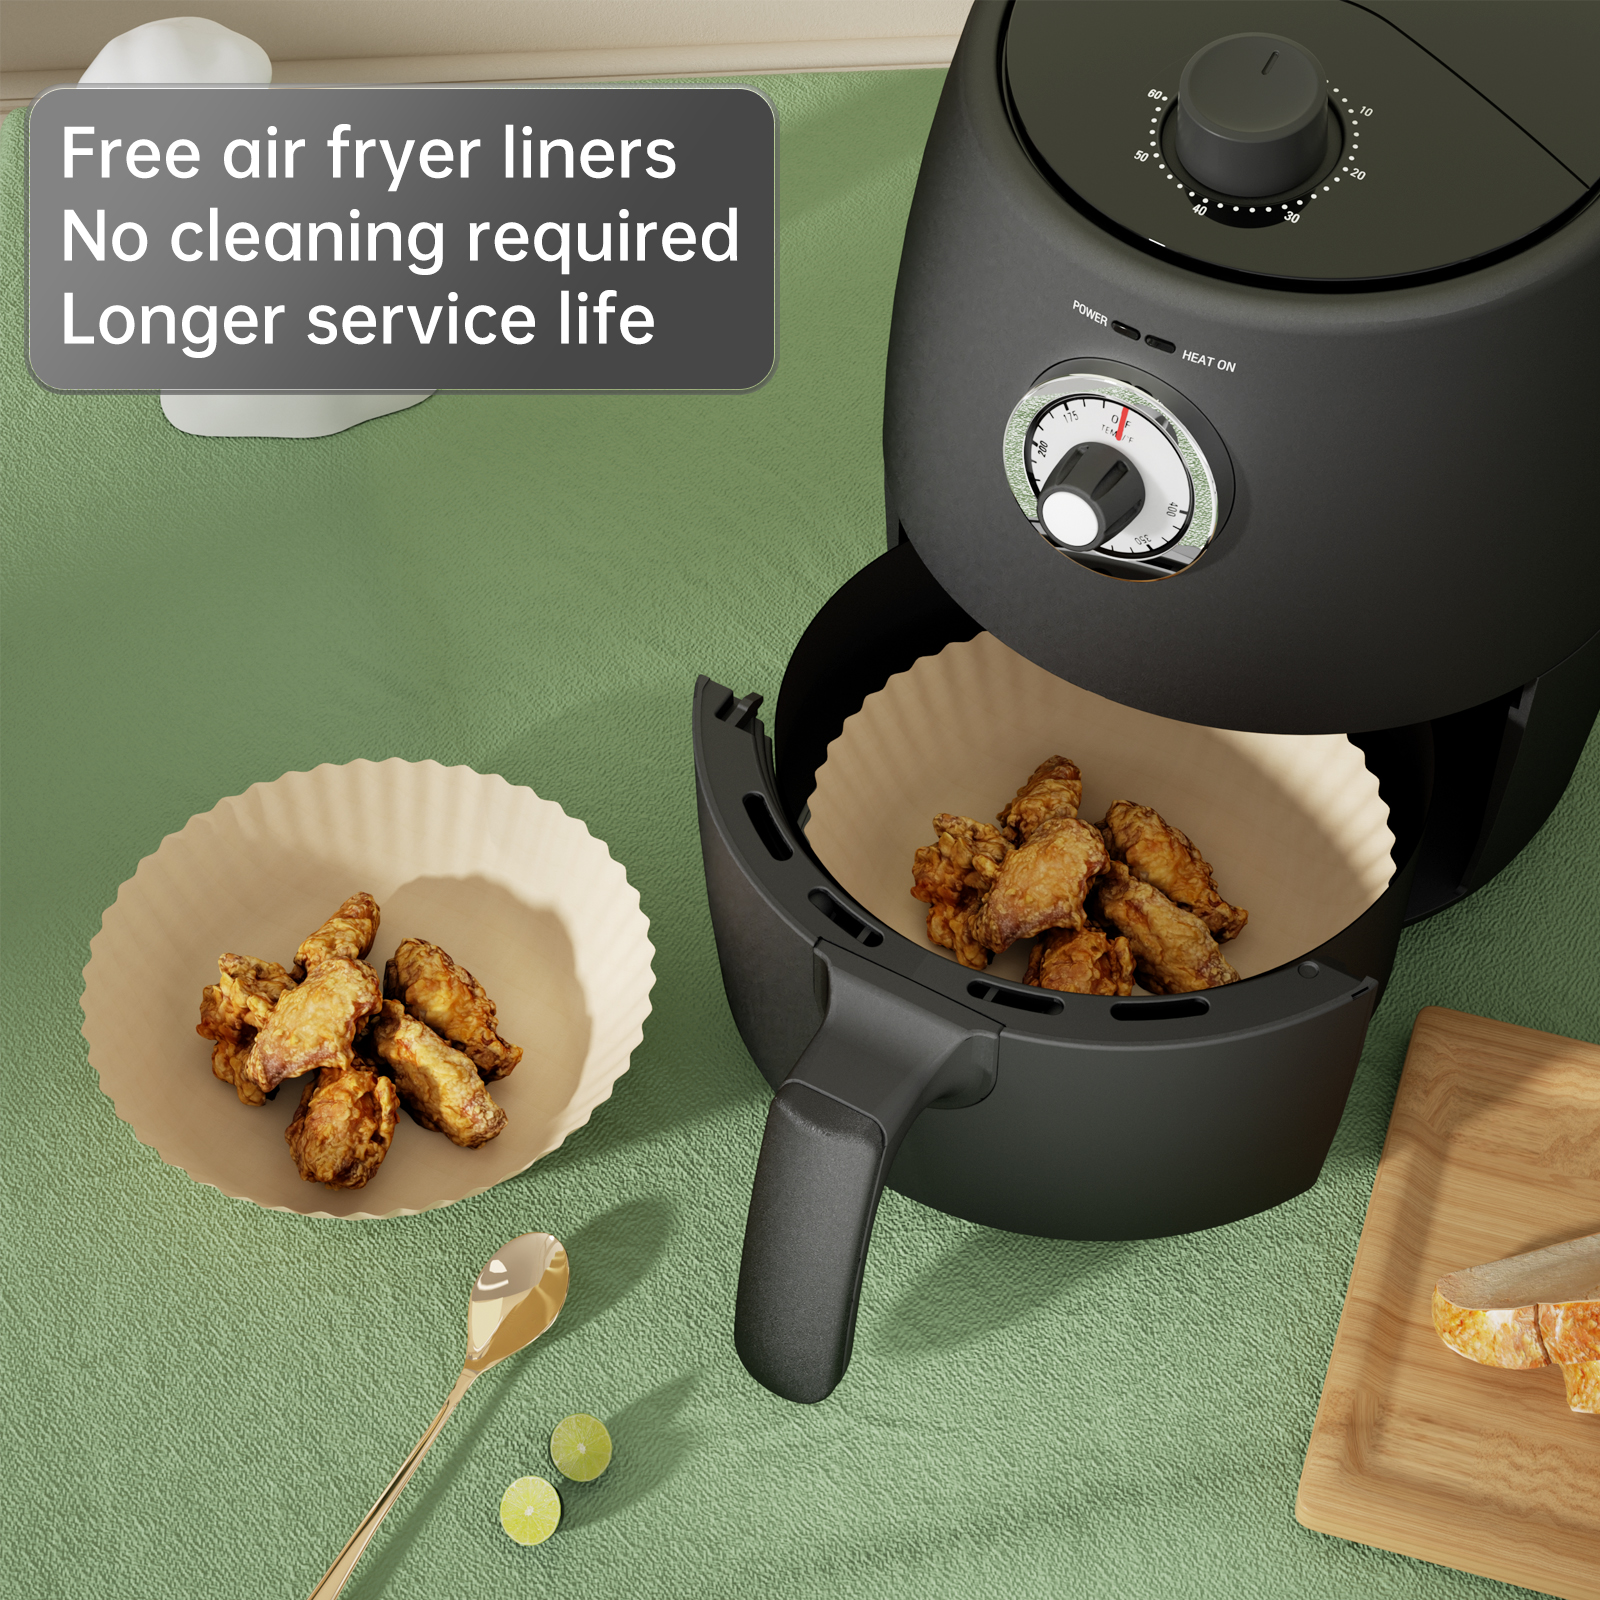 MOOSOO Small Air Fryer, 2 Quart Electric Oil-Less Air Fryer Oven Cooker with Air Fryer Liner, Cookbook - image 5 of 8